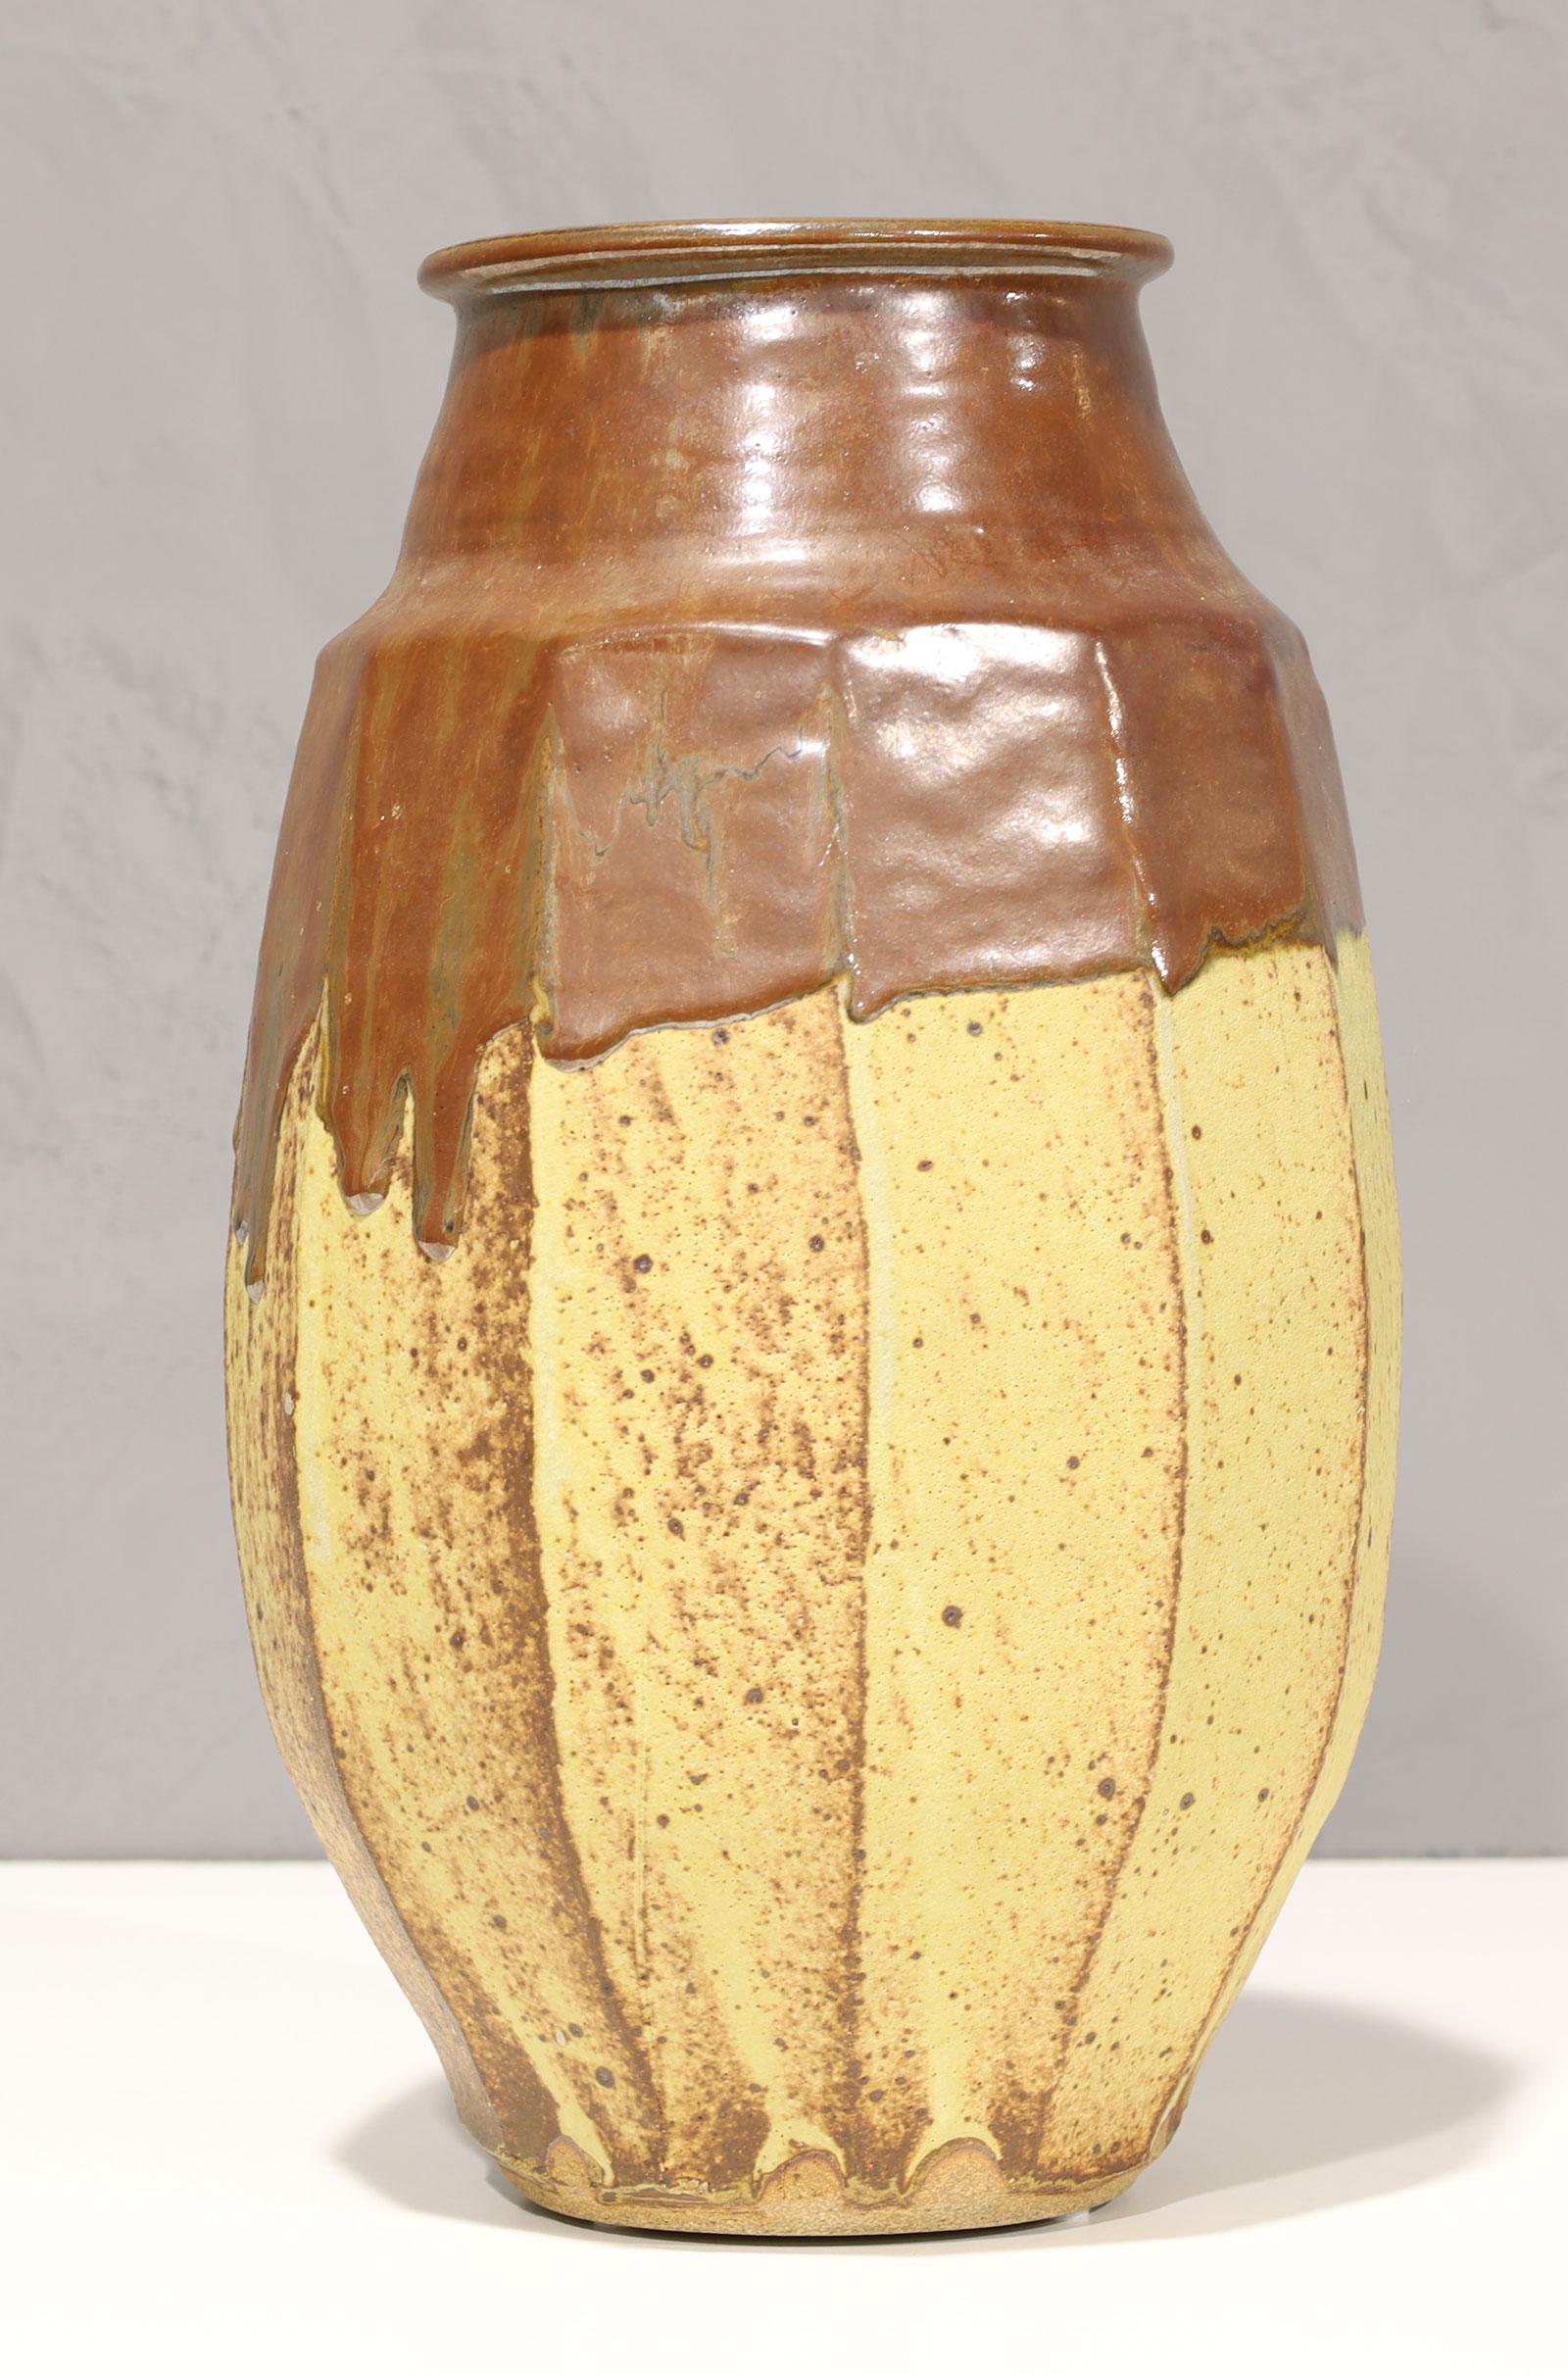 Warren MacKenzie is known for simple, wheel-thrown functional pottery influenced by Bernard Leach and the Japanese aesthetic of the work of Shoji Hamada.

In 1950 MacKenzie and his first wife Alix became the first American apprentices at the